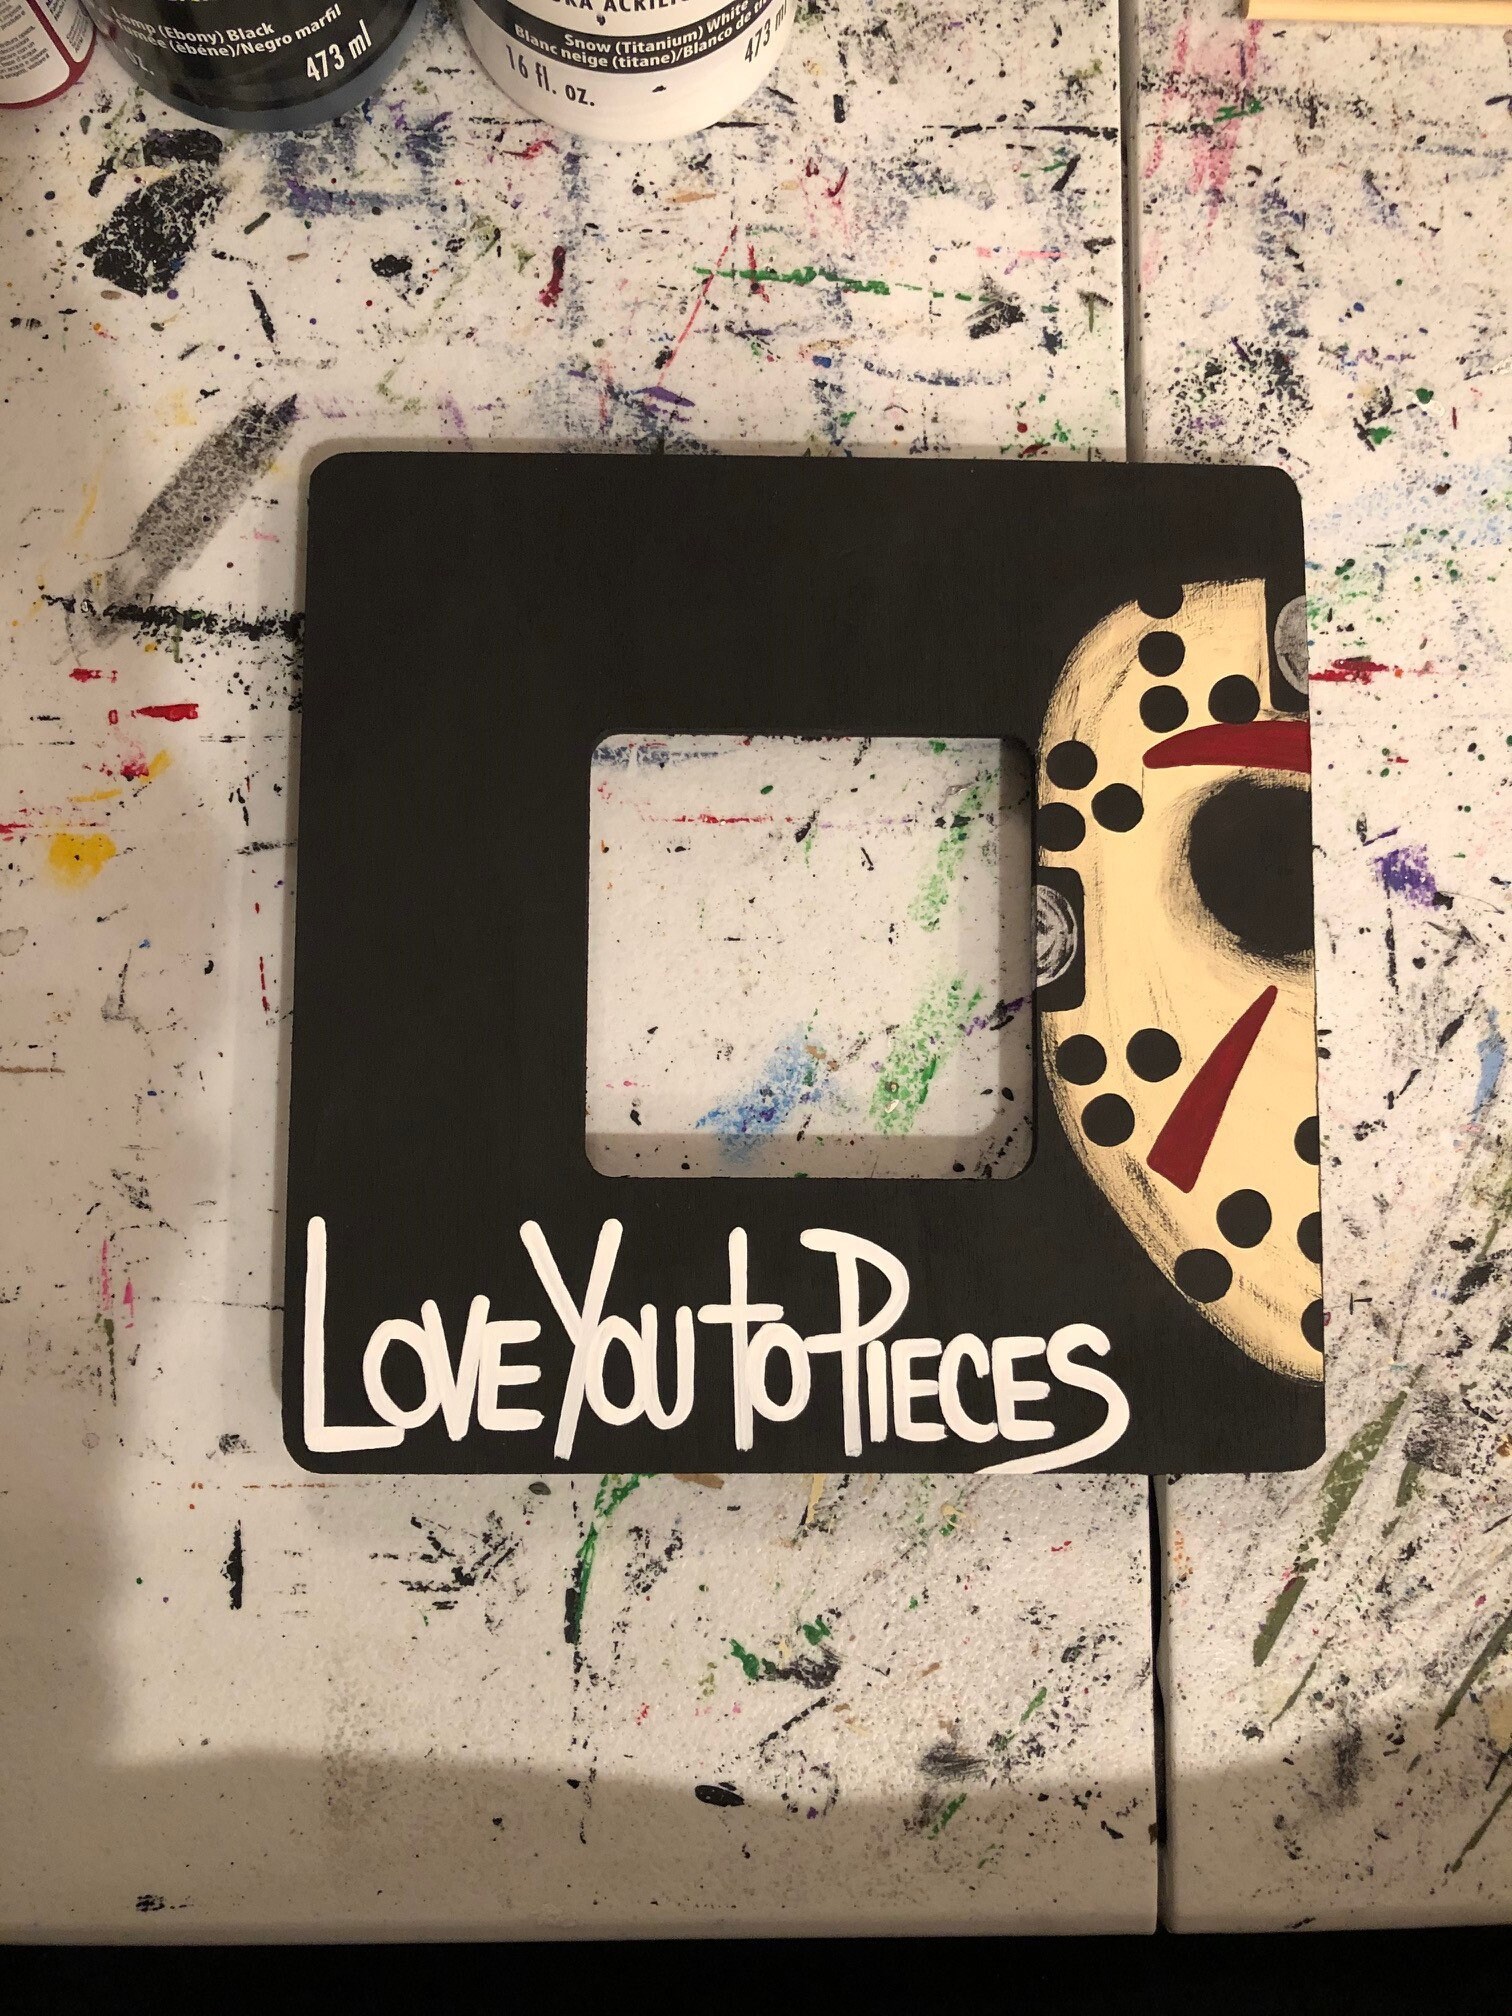 Jason Vorhees Friday The 13th “Love You To Pieces” Hand Painted Picture Frame 